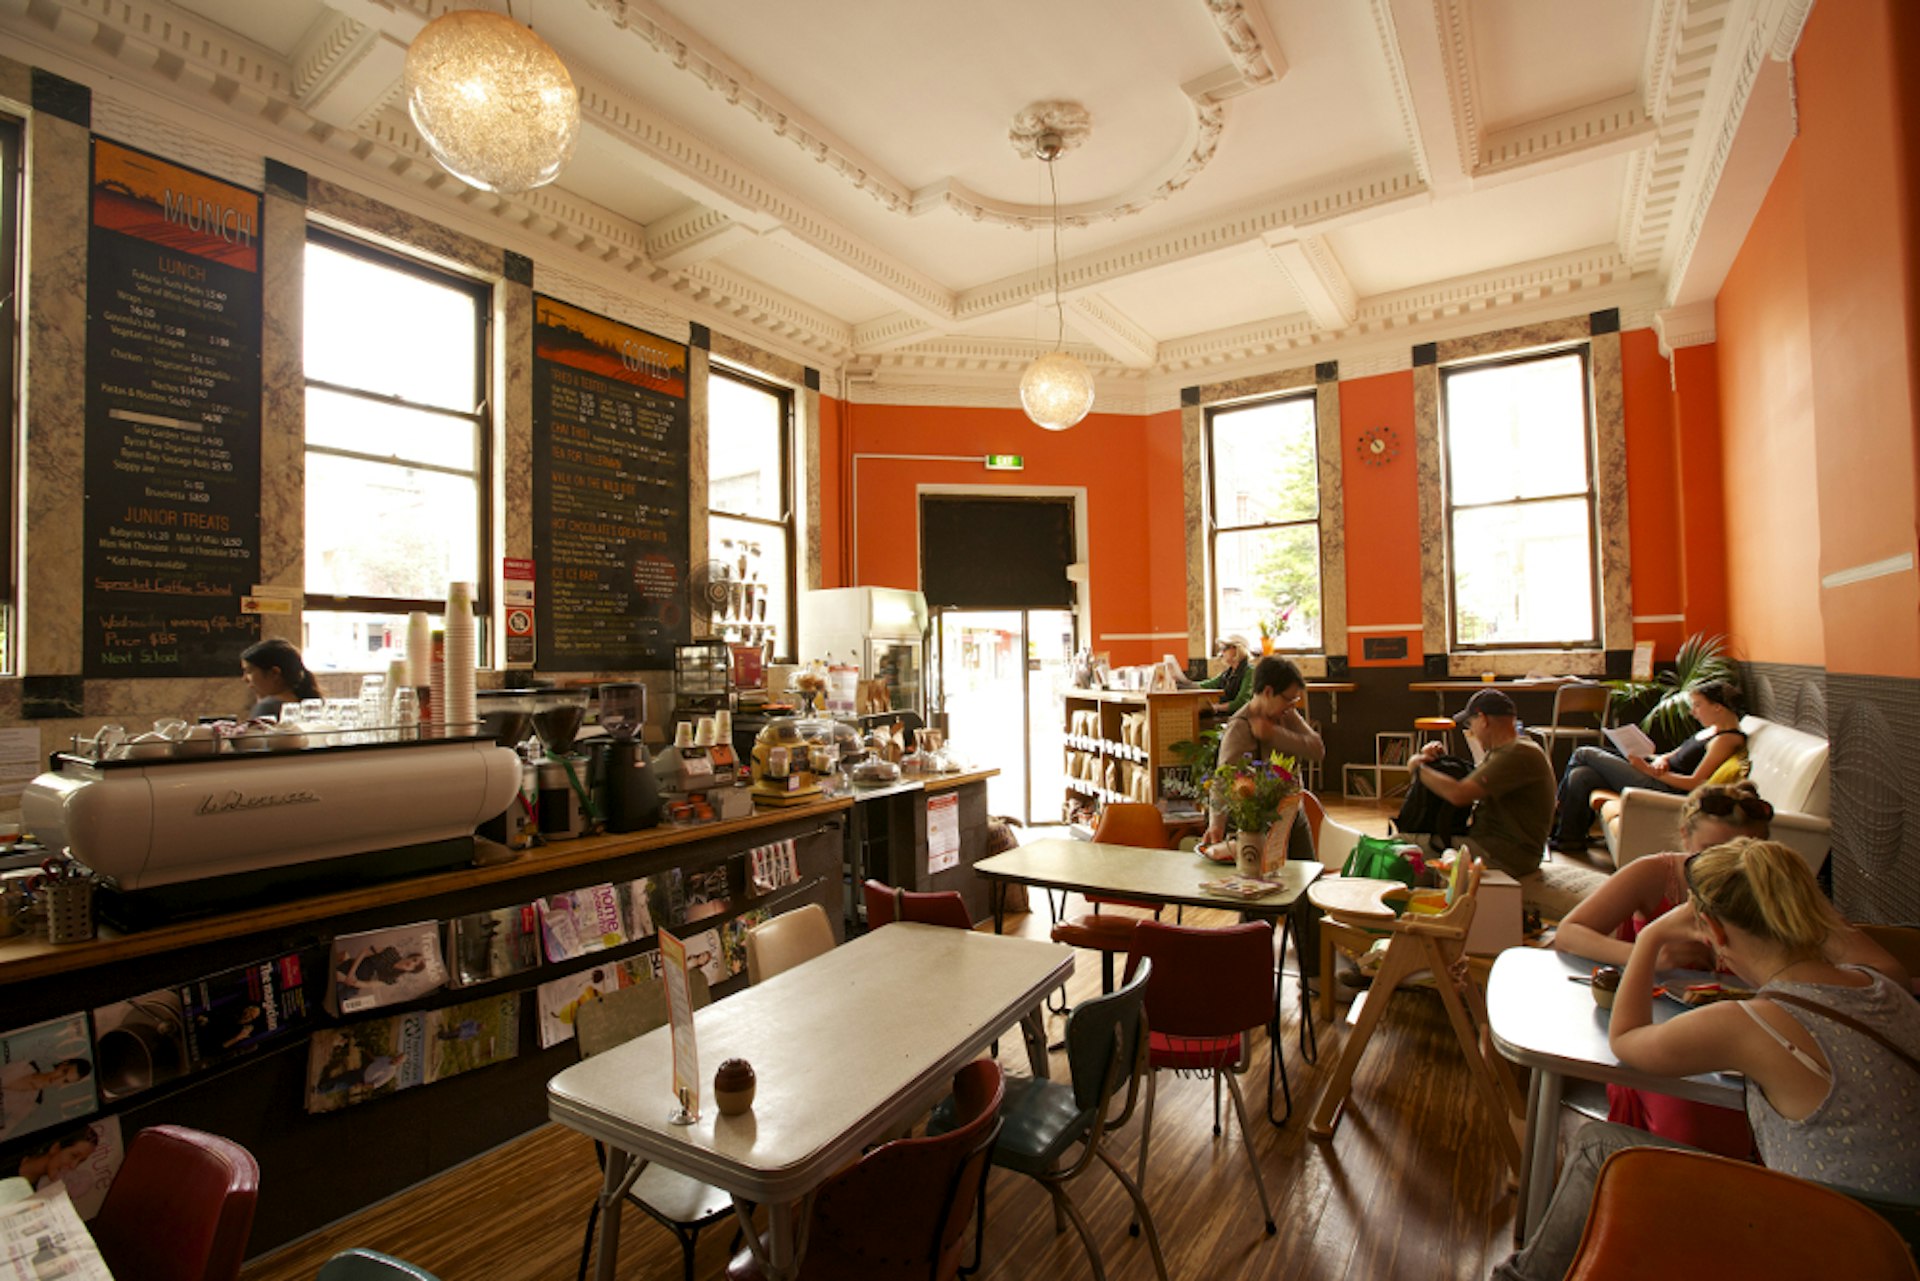 Carbon-neutral coffee roasters and cafe, Sprocket Roasters in Hunter Street. Image by Lonely Planet 